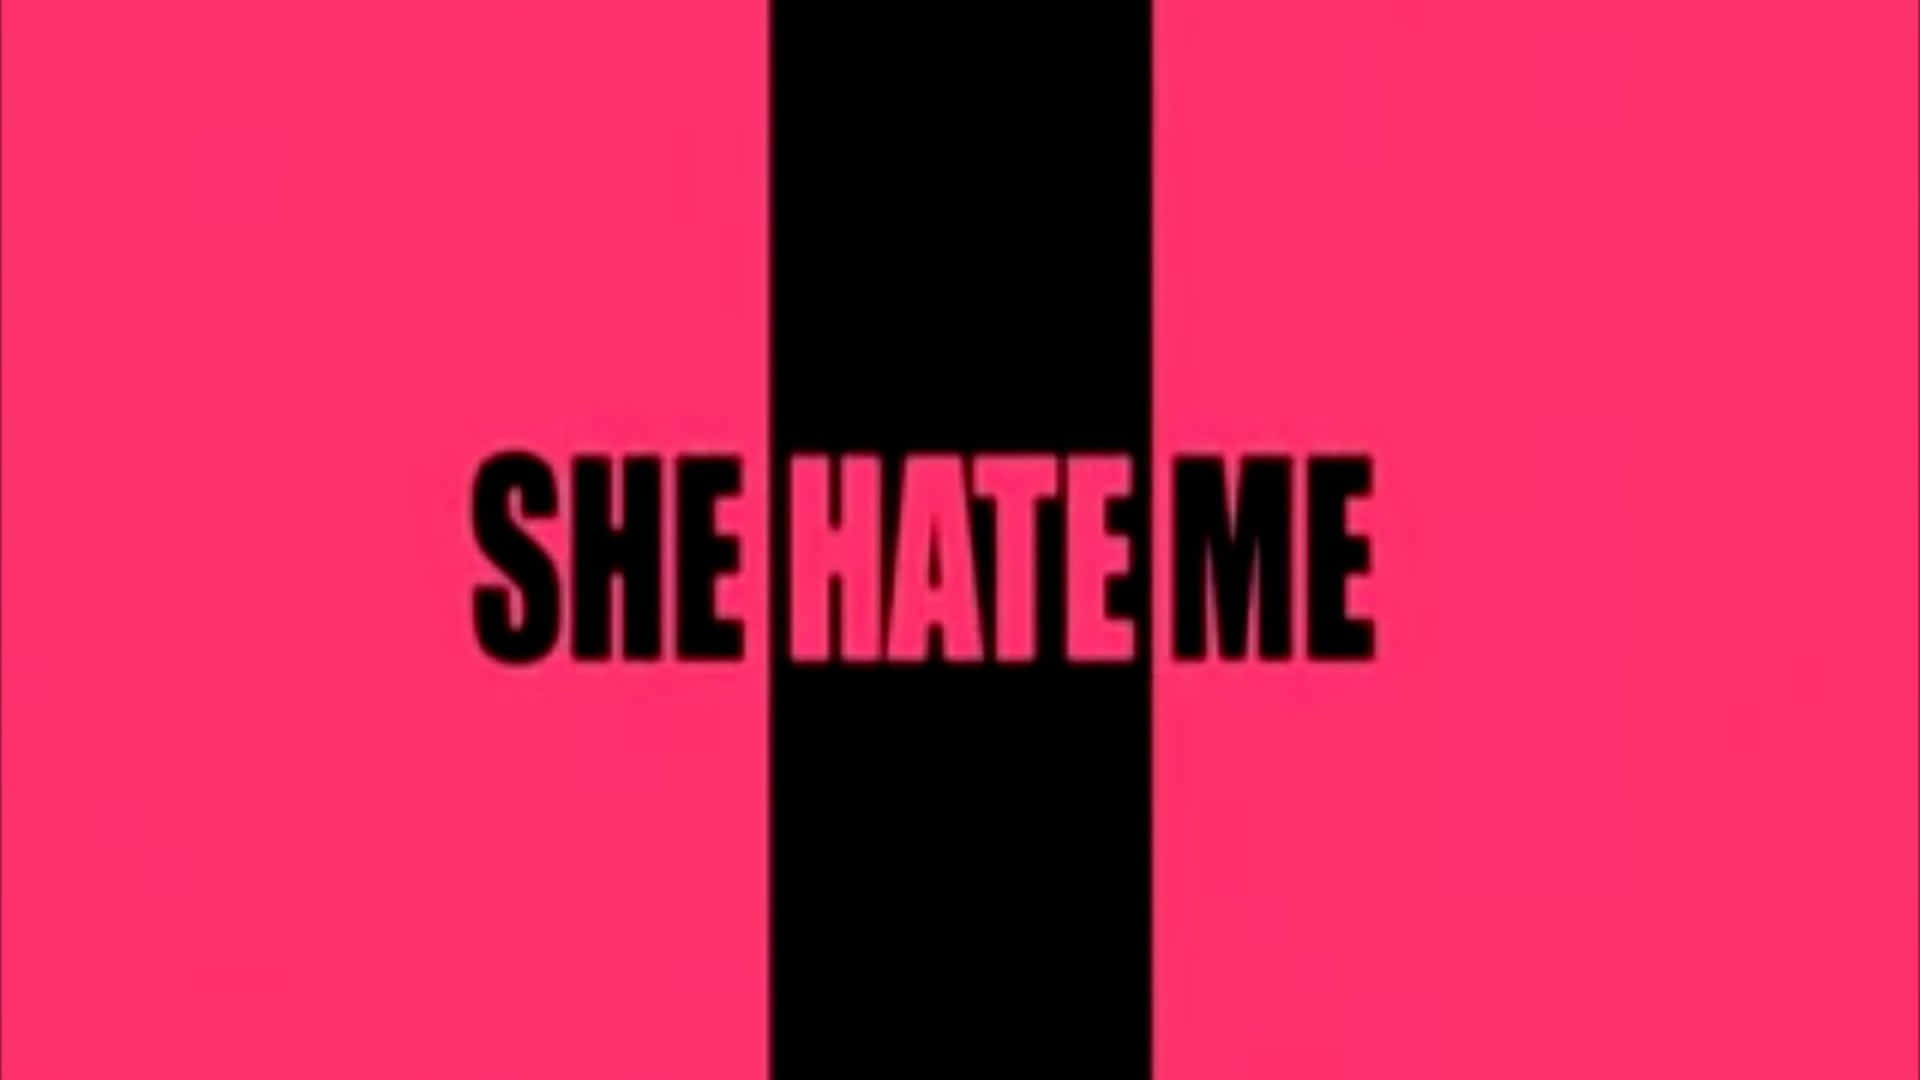 She Hate Me - A Black And Pink Cover Wallpaper